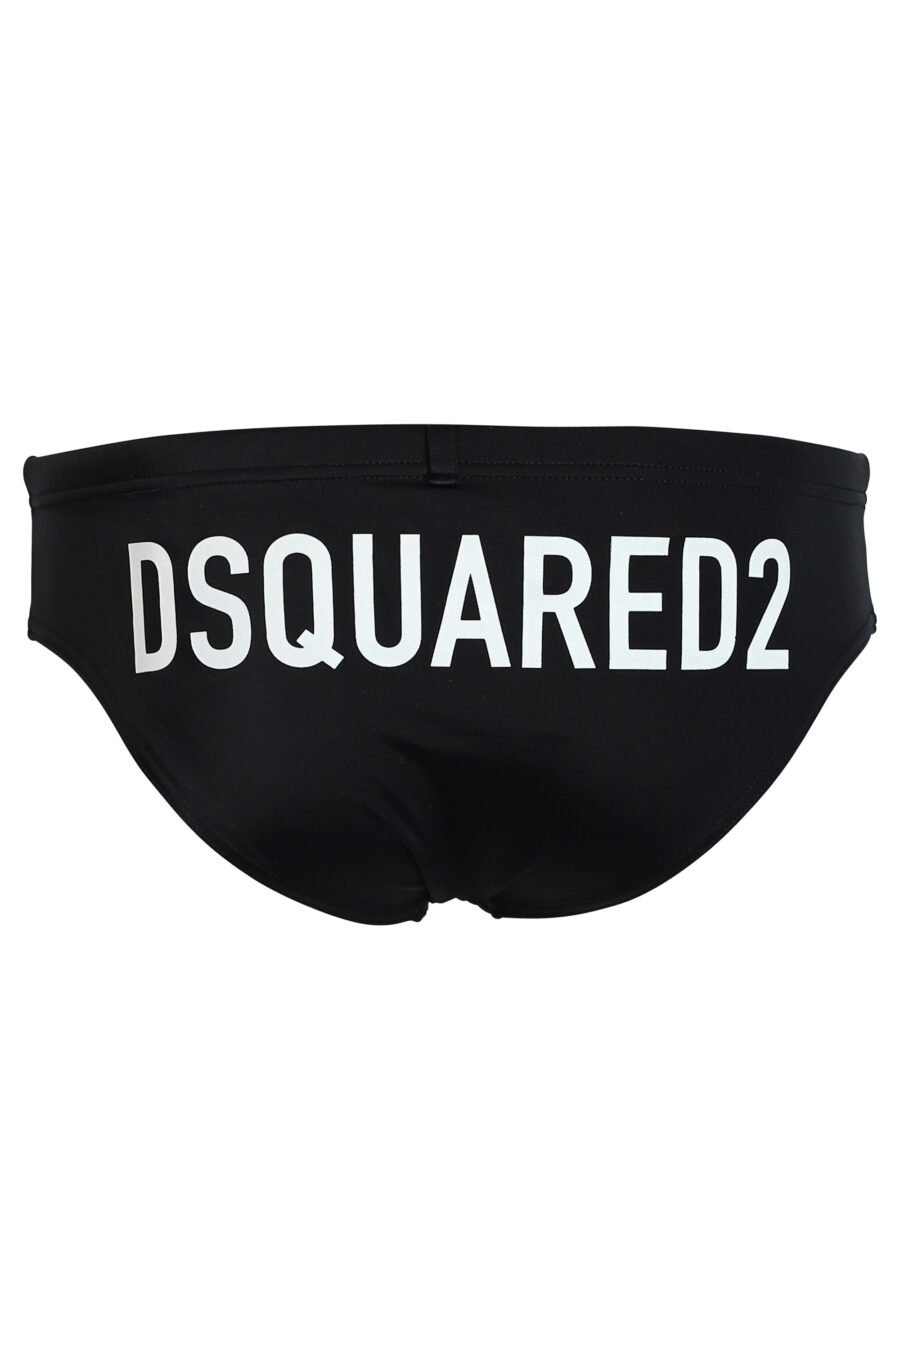 Black briefs with white maxilogue back - 8032674644596 2